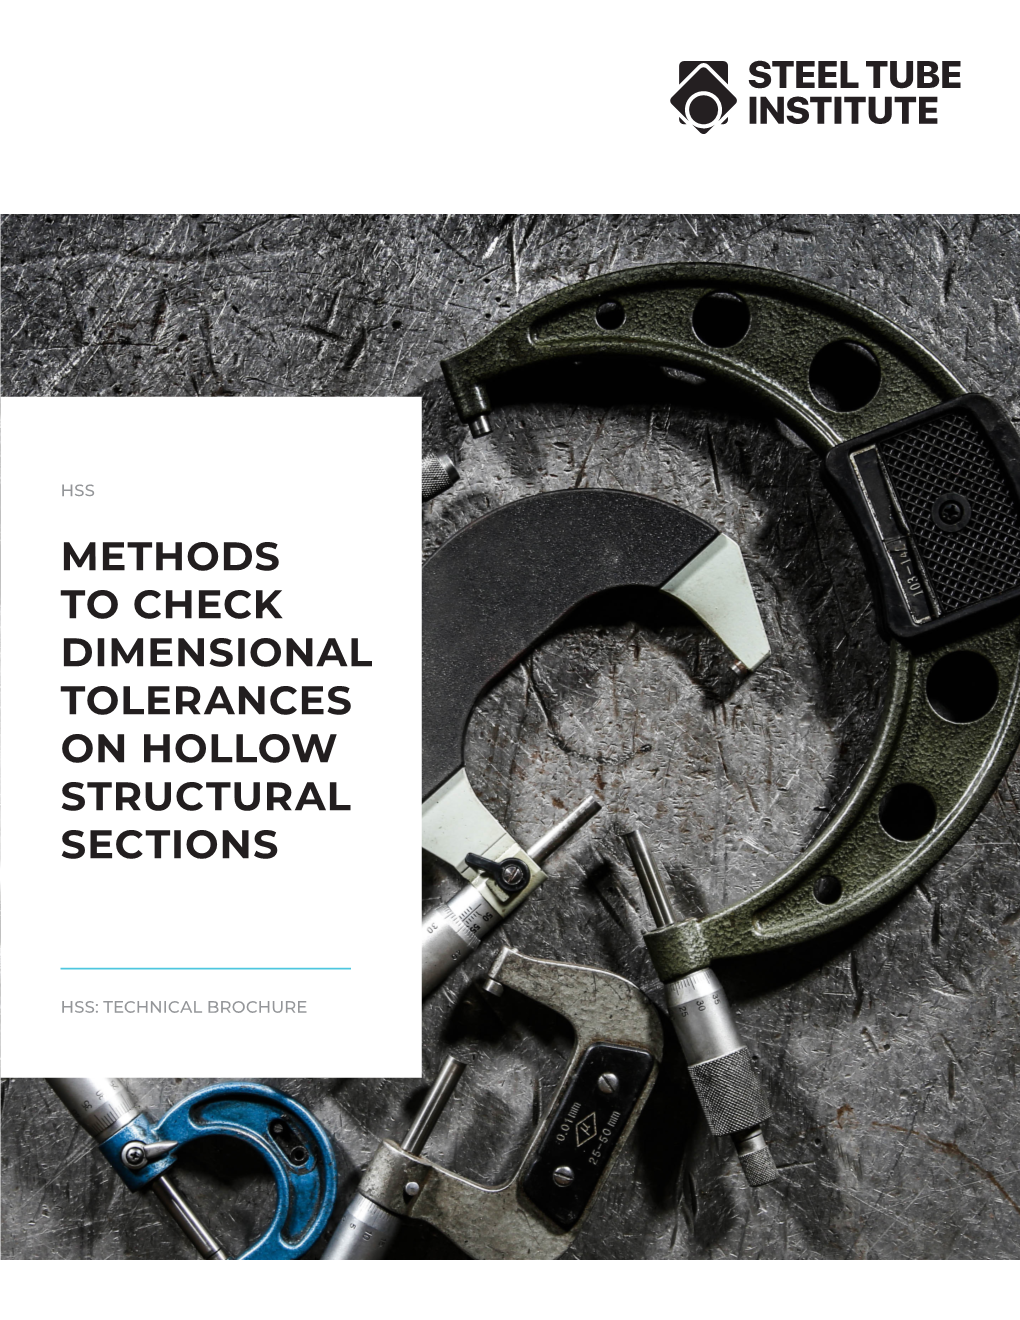 Methods to Check Dimensional Tolerances on Hollow Structural Sections